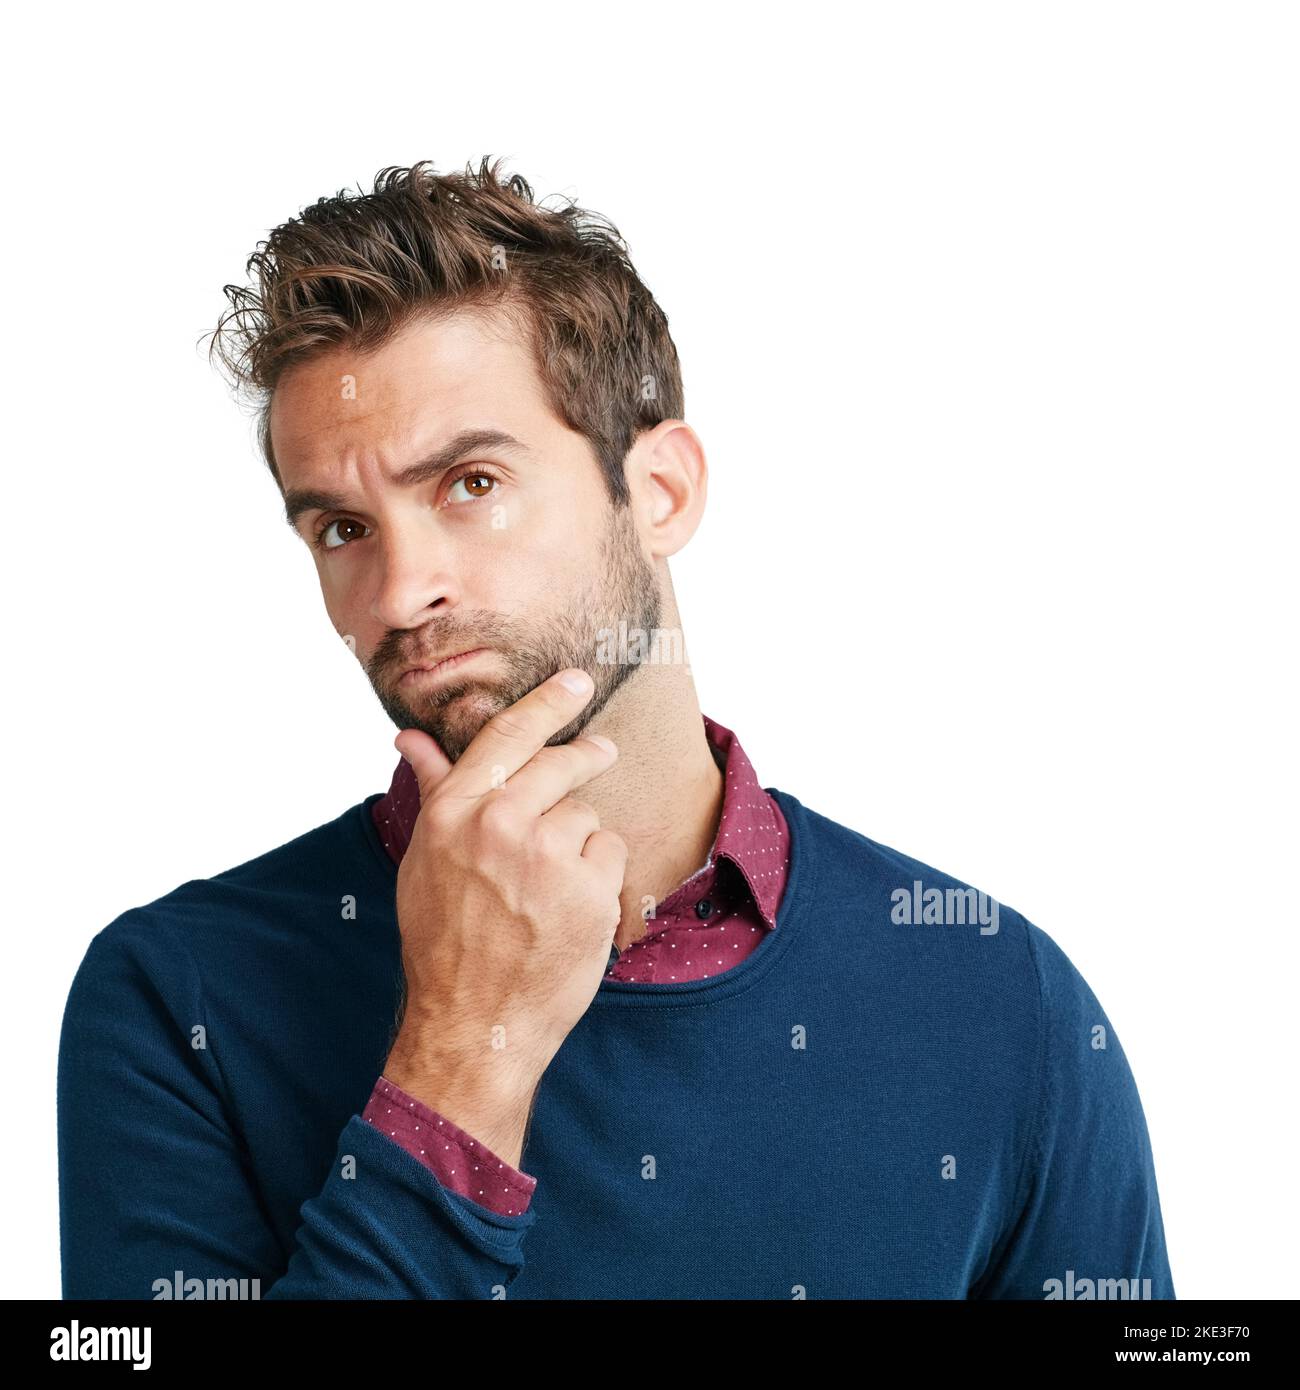 Work that mental muscle. Studio shot of a man looking unsure against a white background. Stock Photo